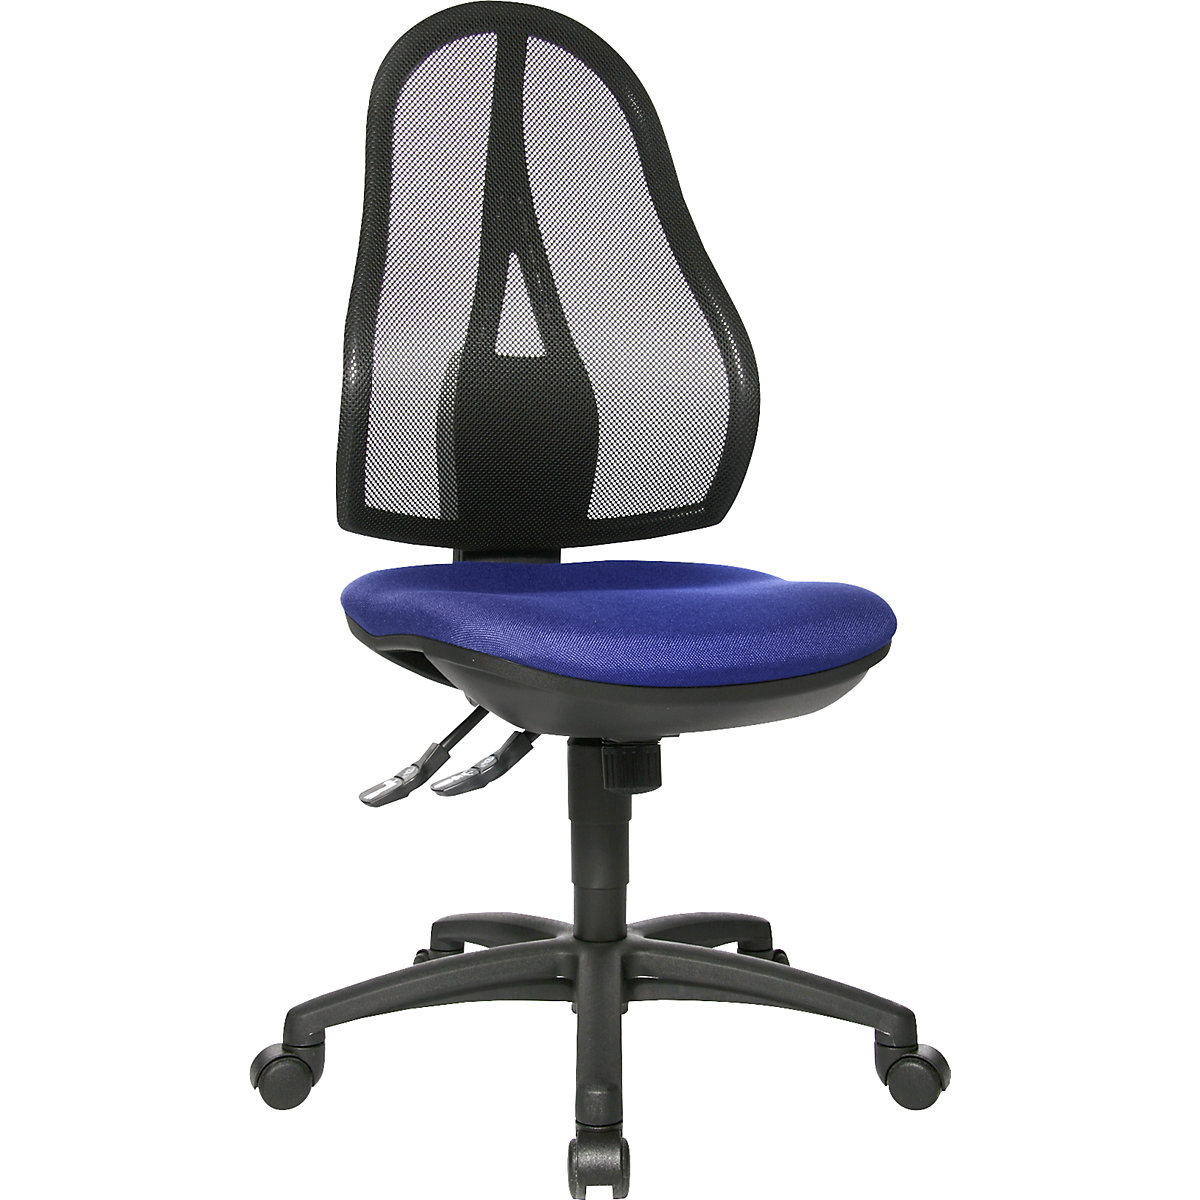 OPEN POINT SY office swivel chair – Topstar